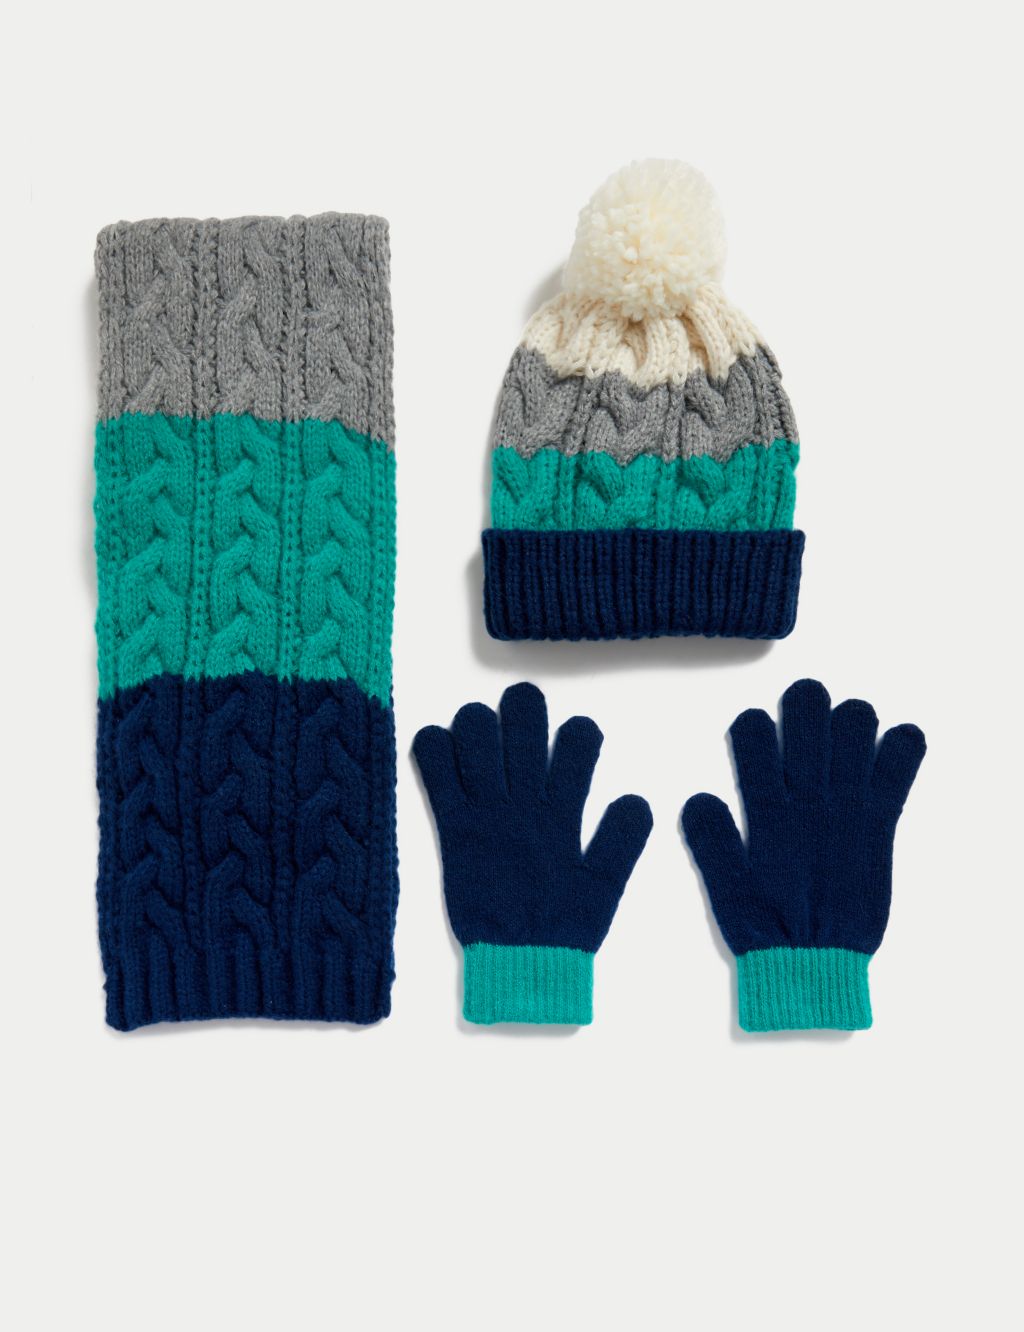 Kids' Colour Block Hat, Scarf and Glove Set (6-13 Yrs) image 1